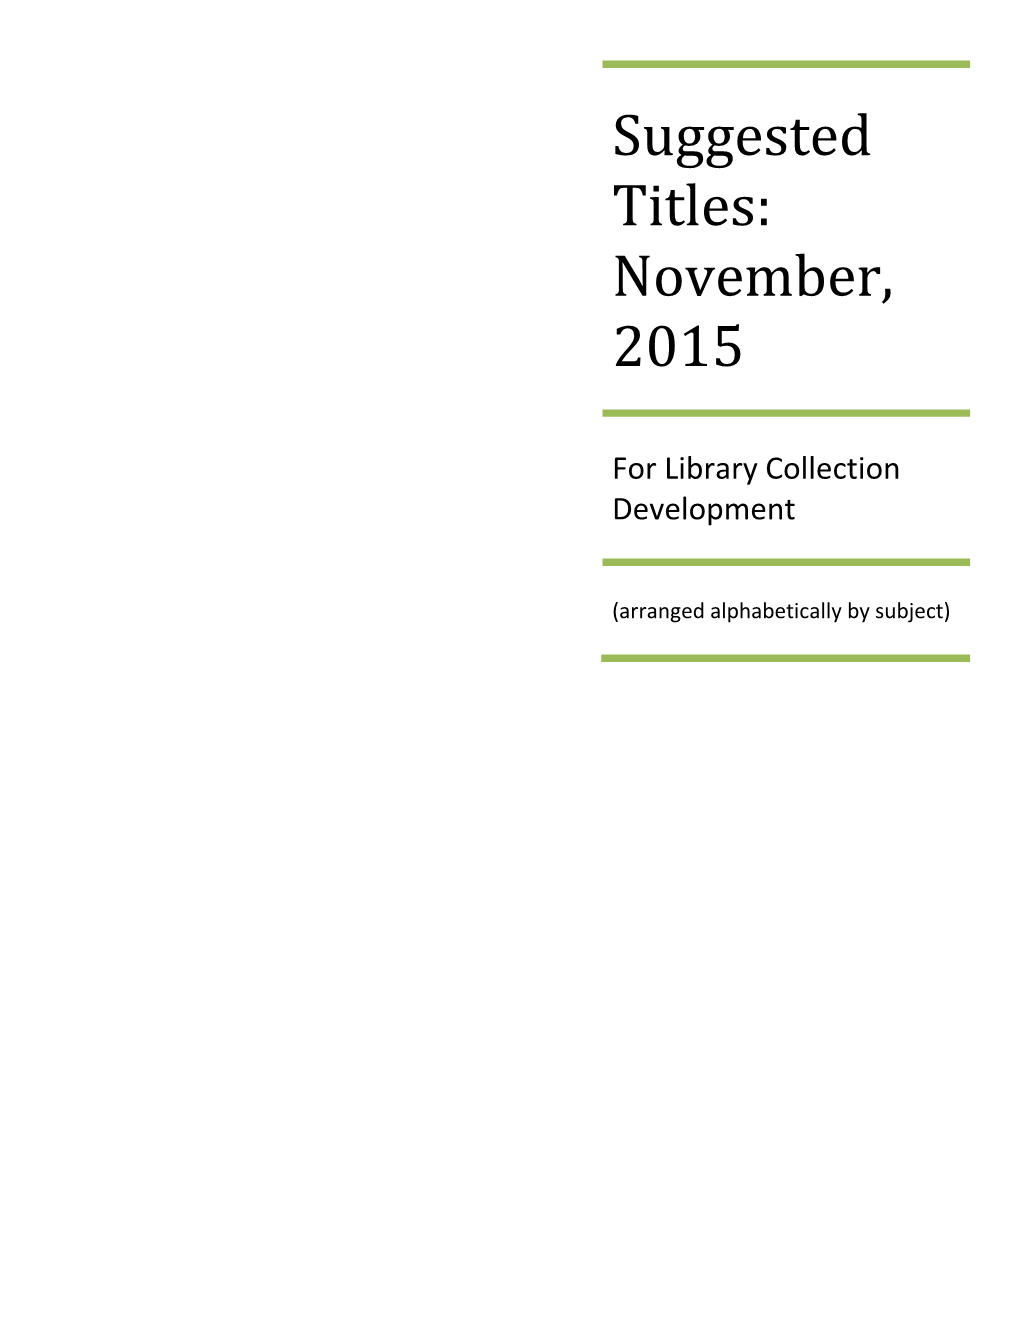 Suggested Titles: November, 2015